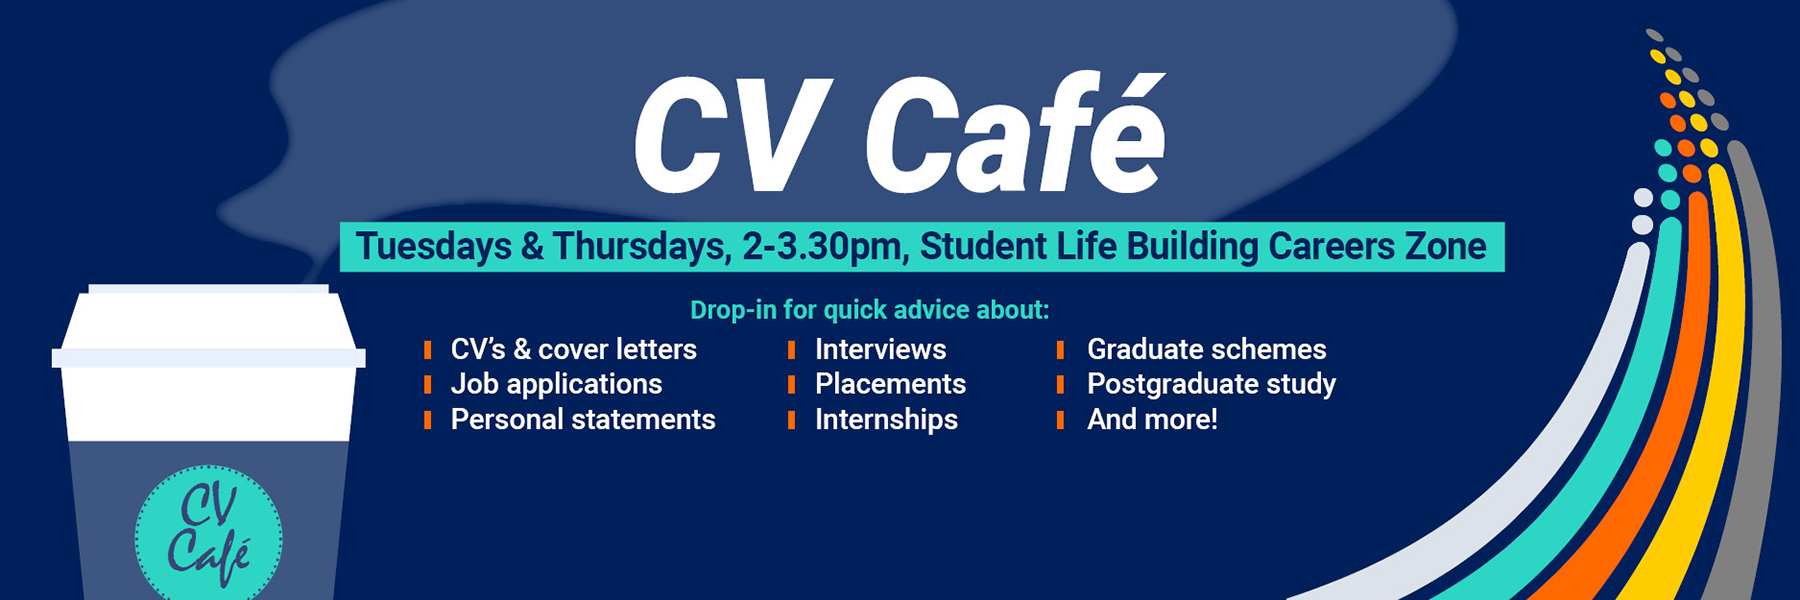 Drop in to our CV Café for advice - Tuesdays and Thursdays, 2pm to 3.30pm at the Careers Zone in the Student Life Building